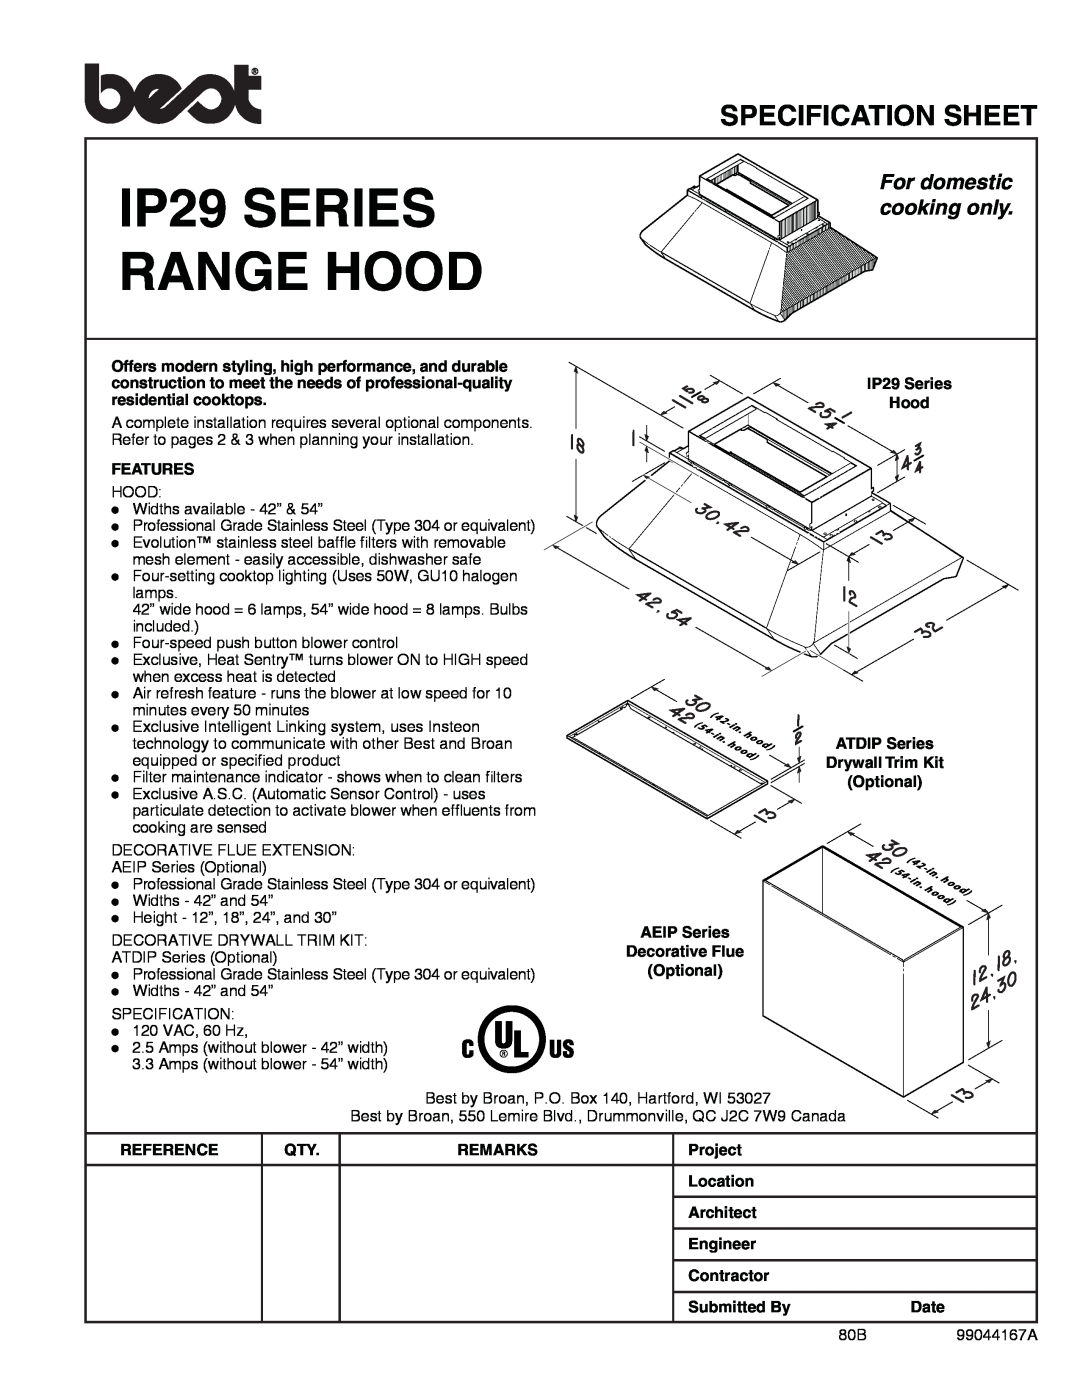 Best specifications IP29 SERIES RANGE HOOD, Specification Sheet, For domestic cooking only 